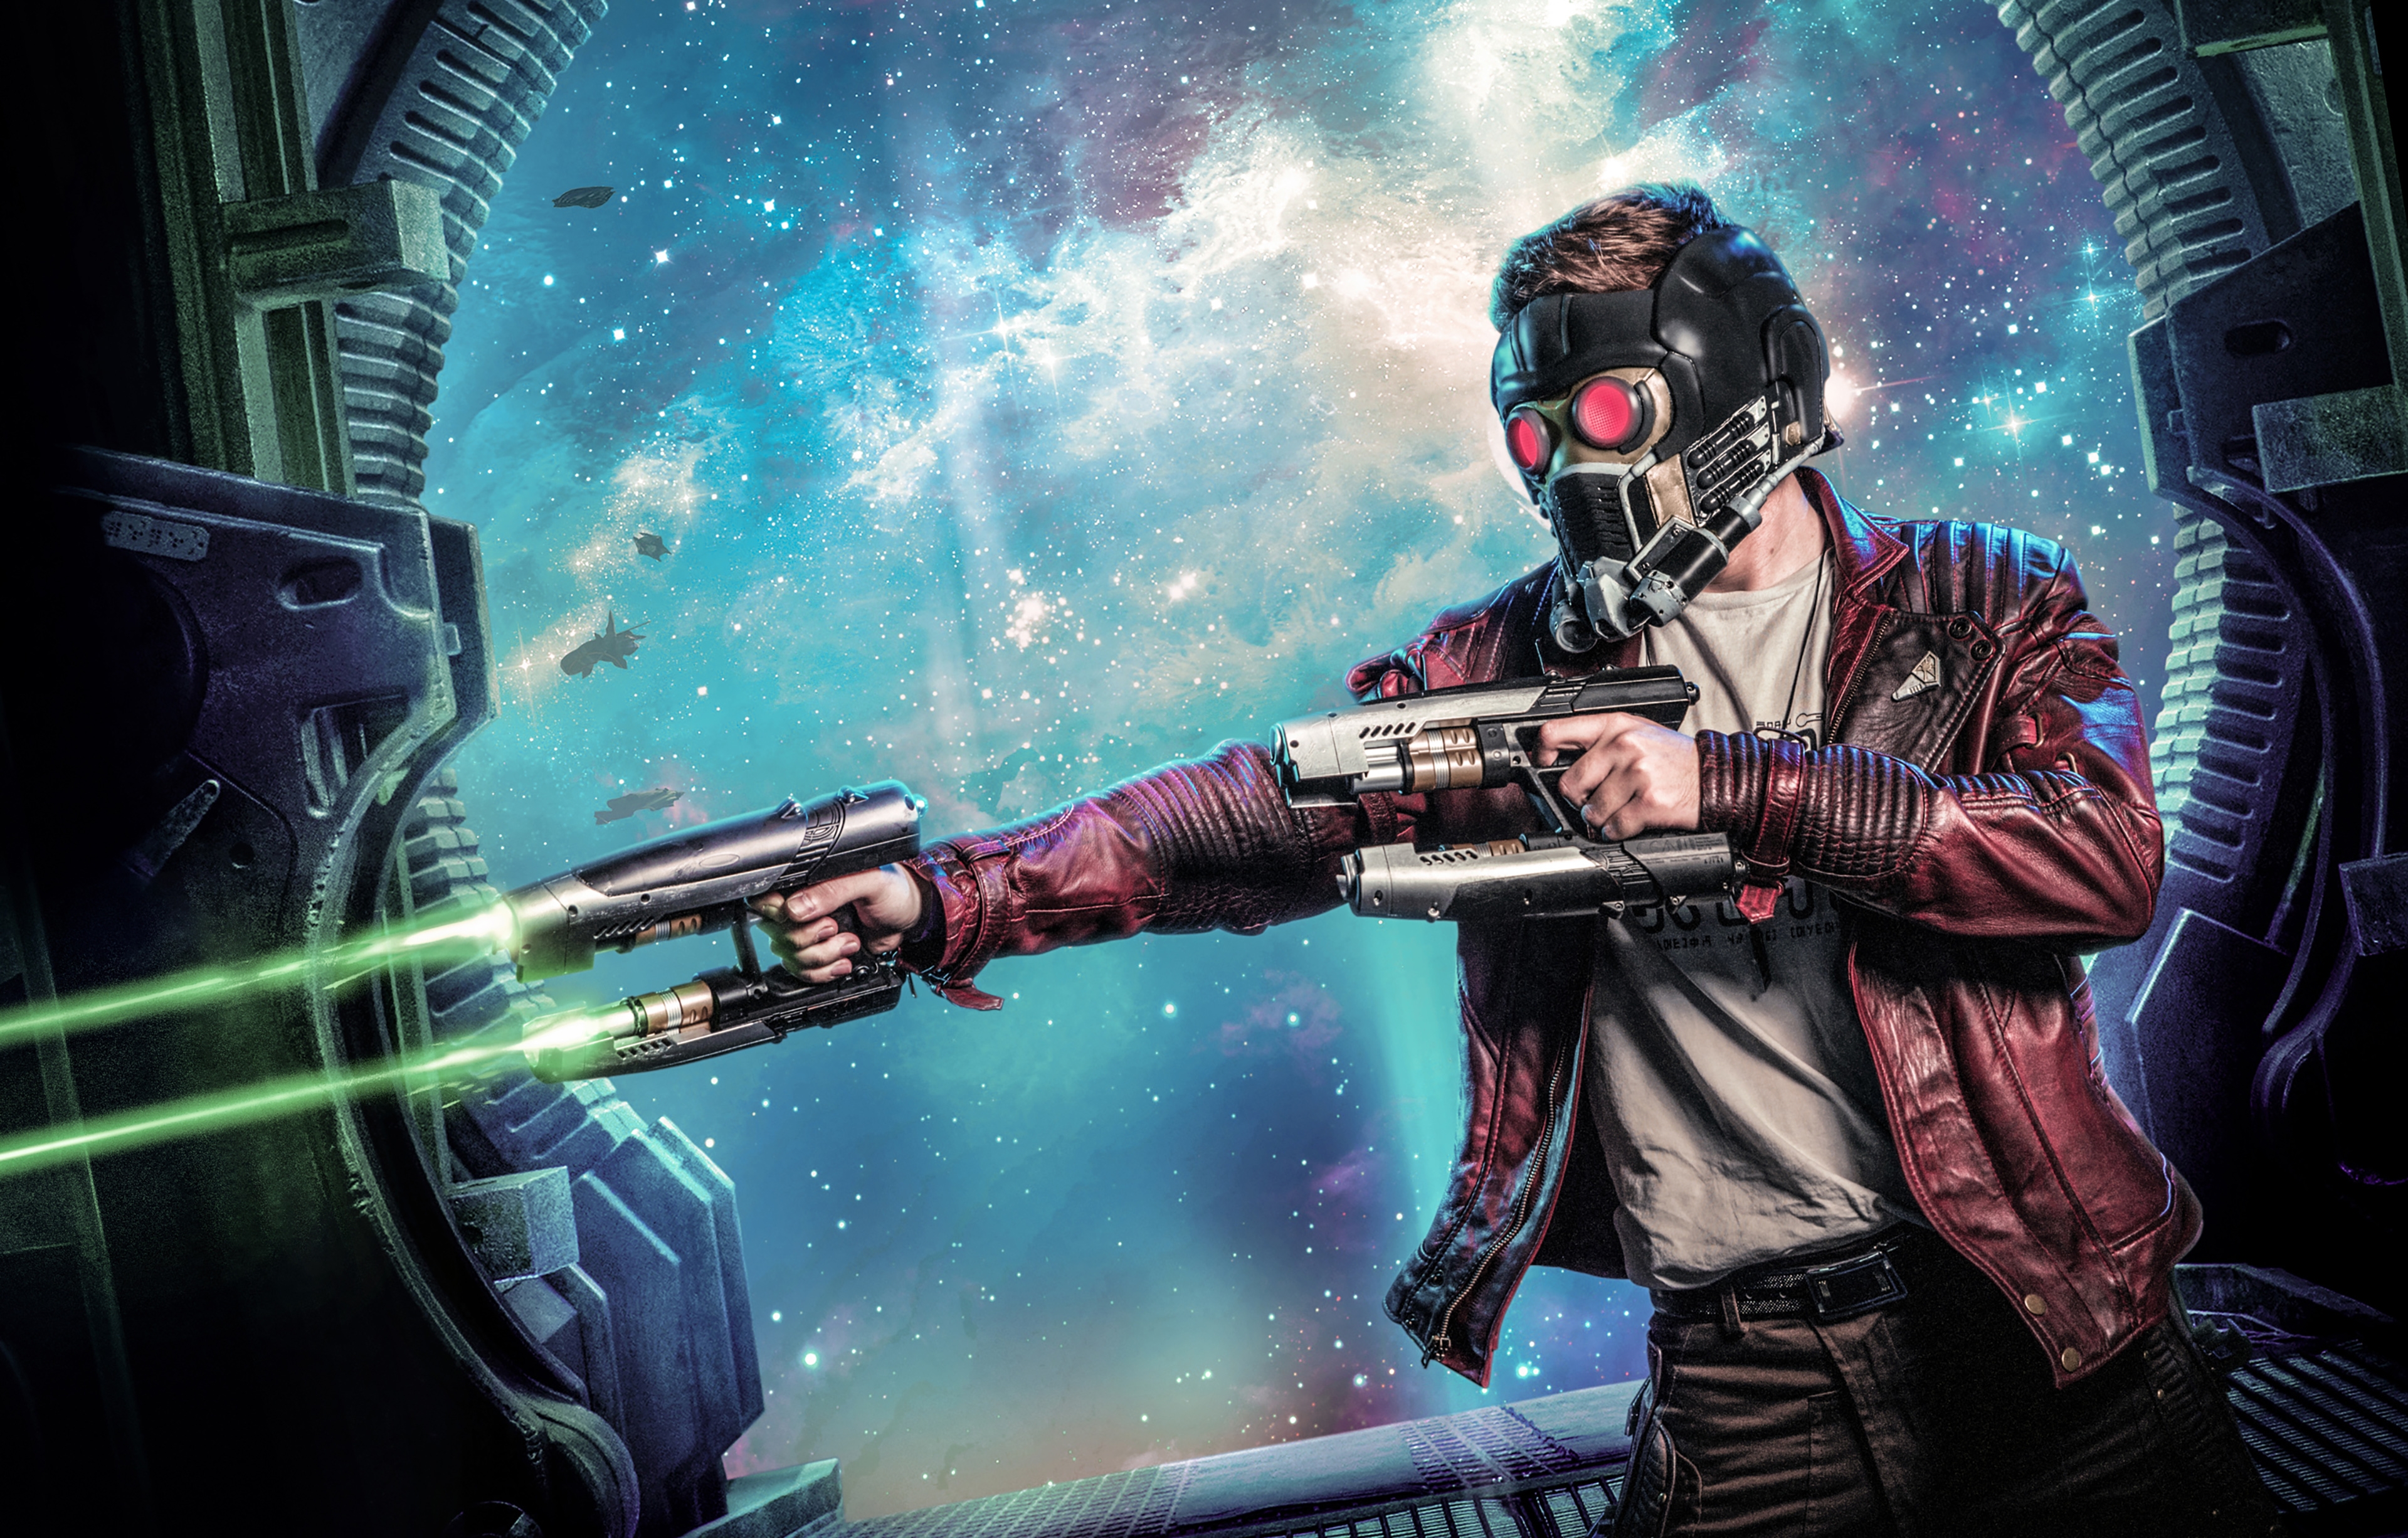 HD wallpaper, Guardians Of The Galaxy, Cosplay, Marvel Superheroes, Star Lord